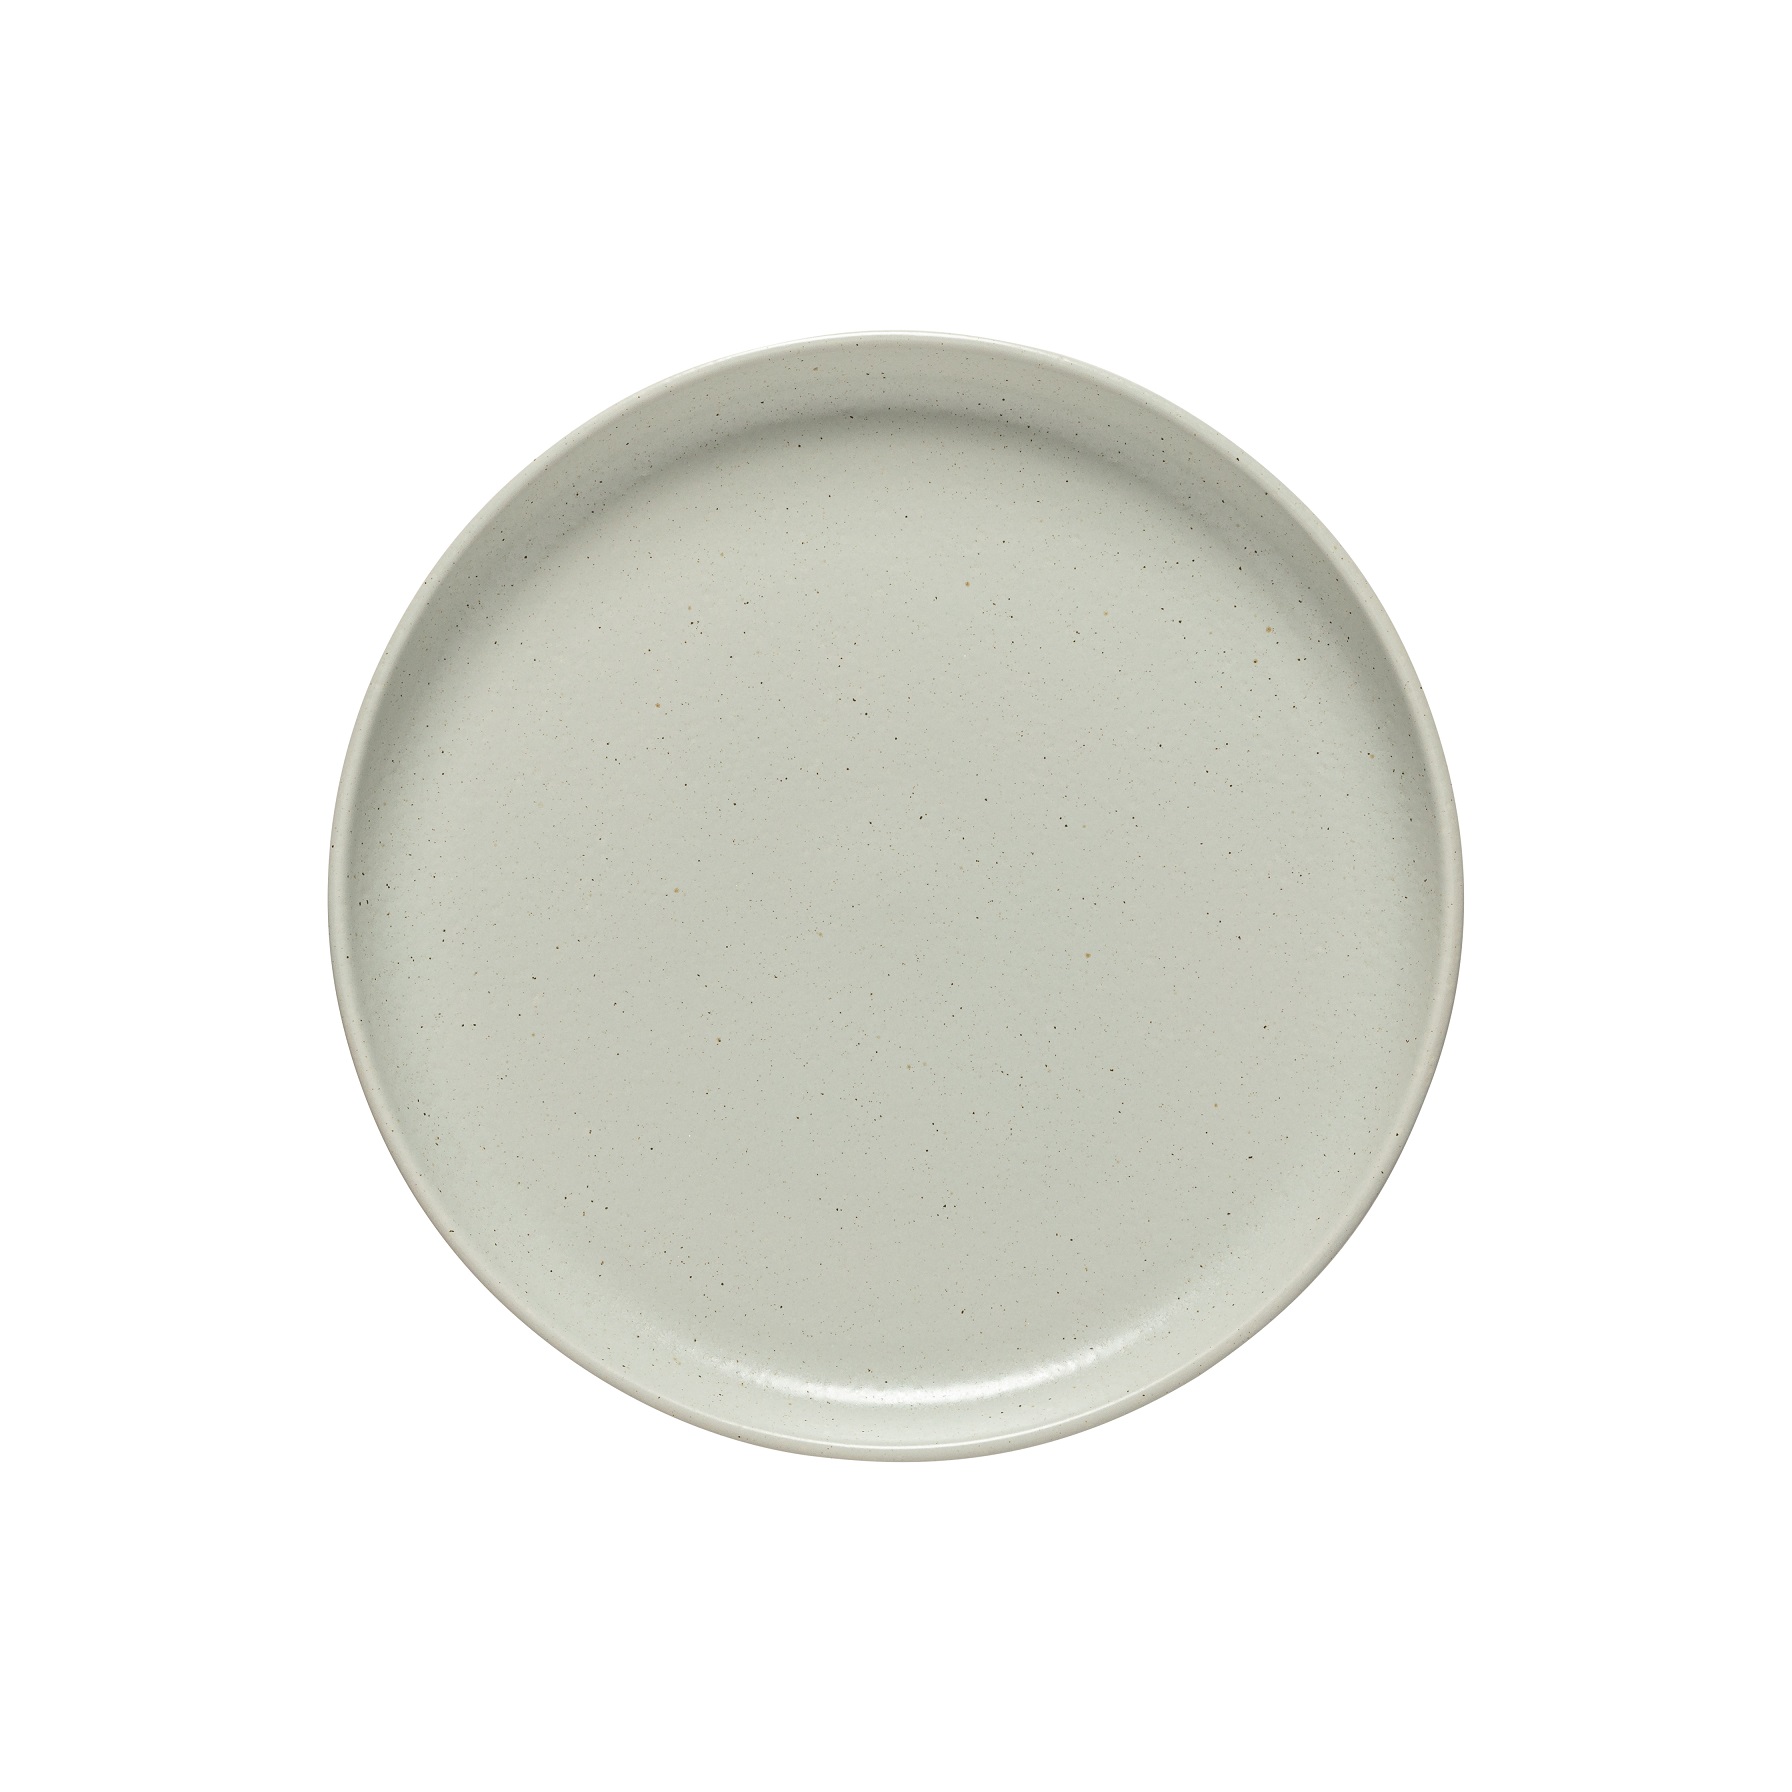 Pacifica Oyster Grey Dinner Plate 27cm Gift